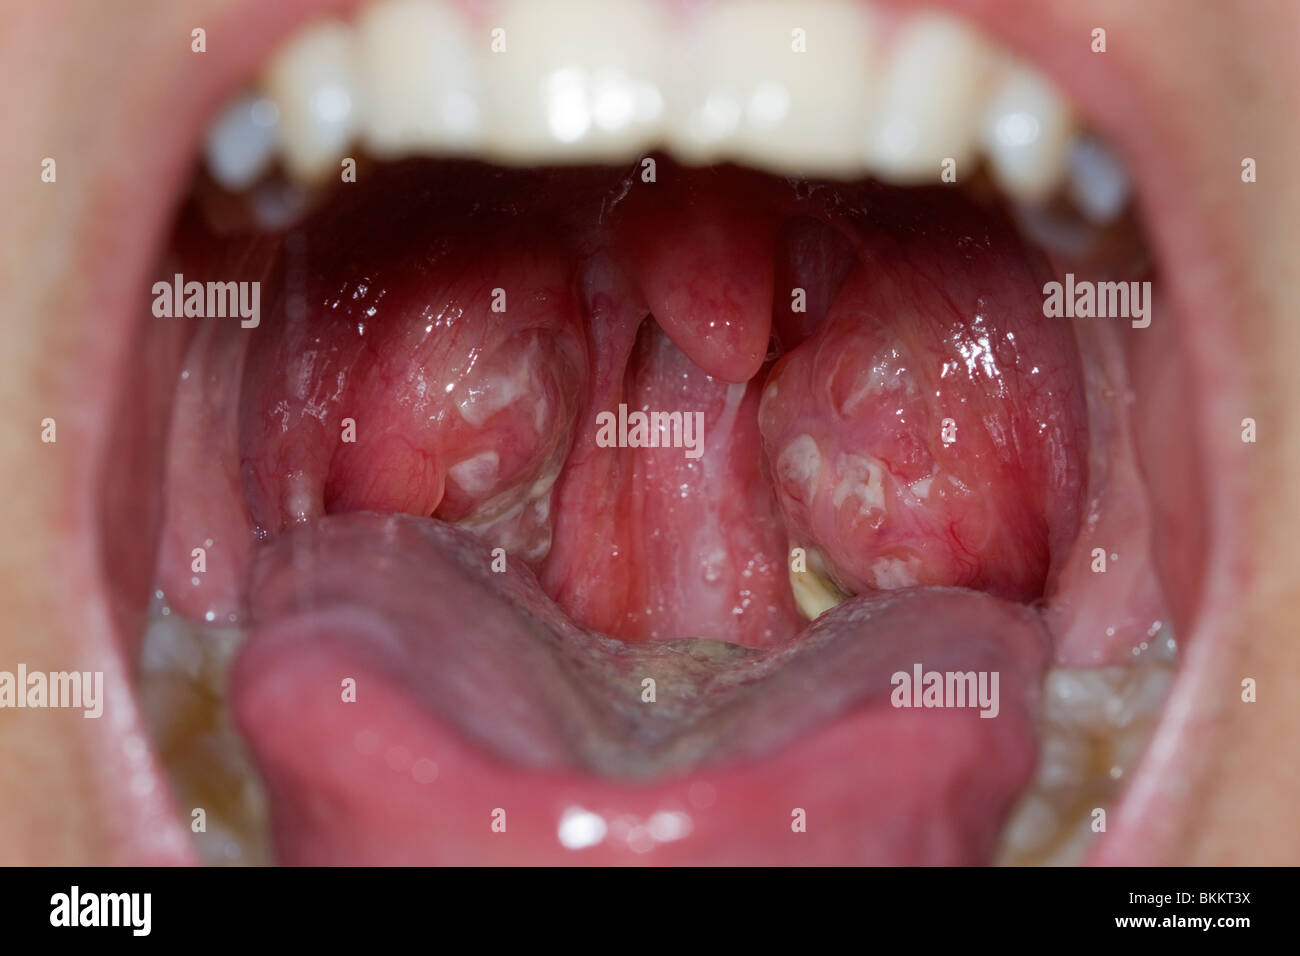 Tonsillitis. Infected, swollen tonsils on a teenage girl. From a virus infection Stock Photo